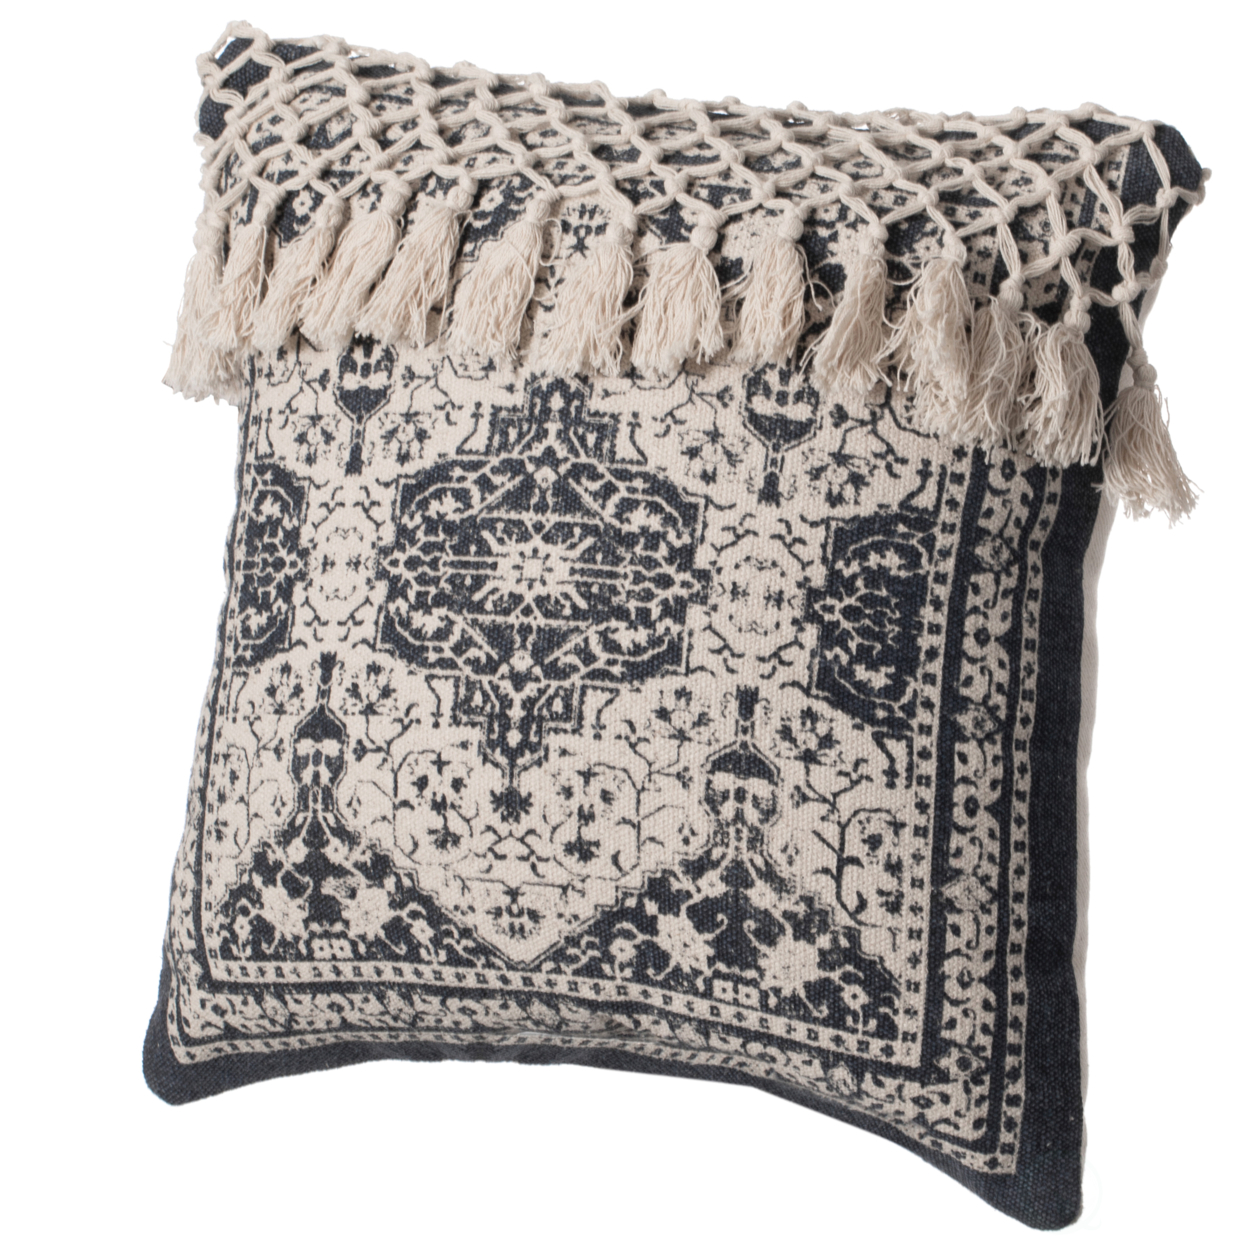 16 Handwoven Cotton Throw Pillow Cover With Traditional Pattern And Tasseled Top - Navy